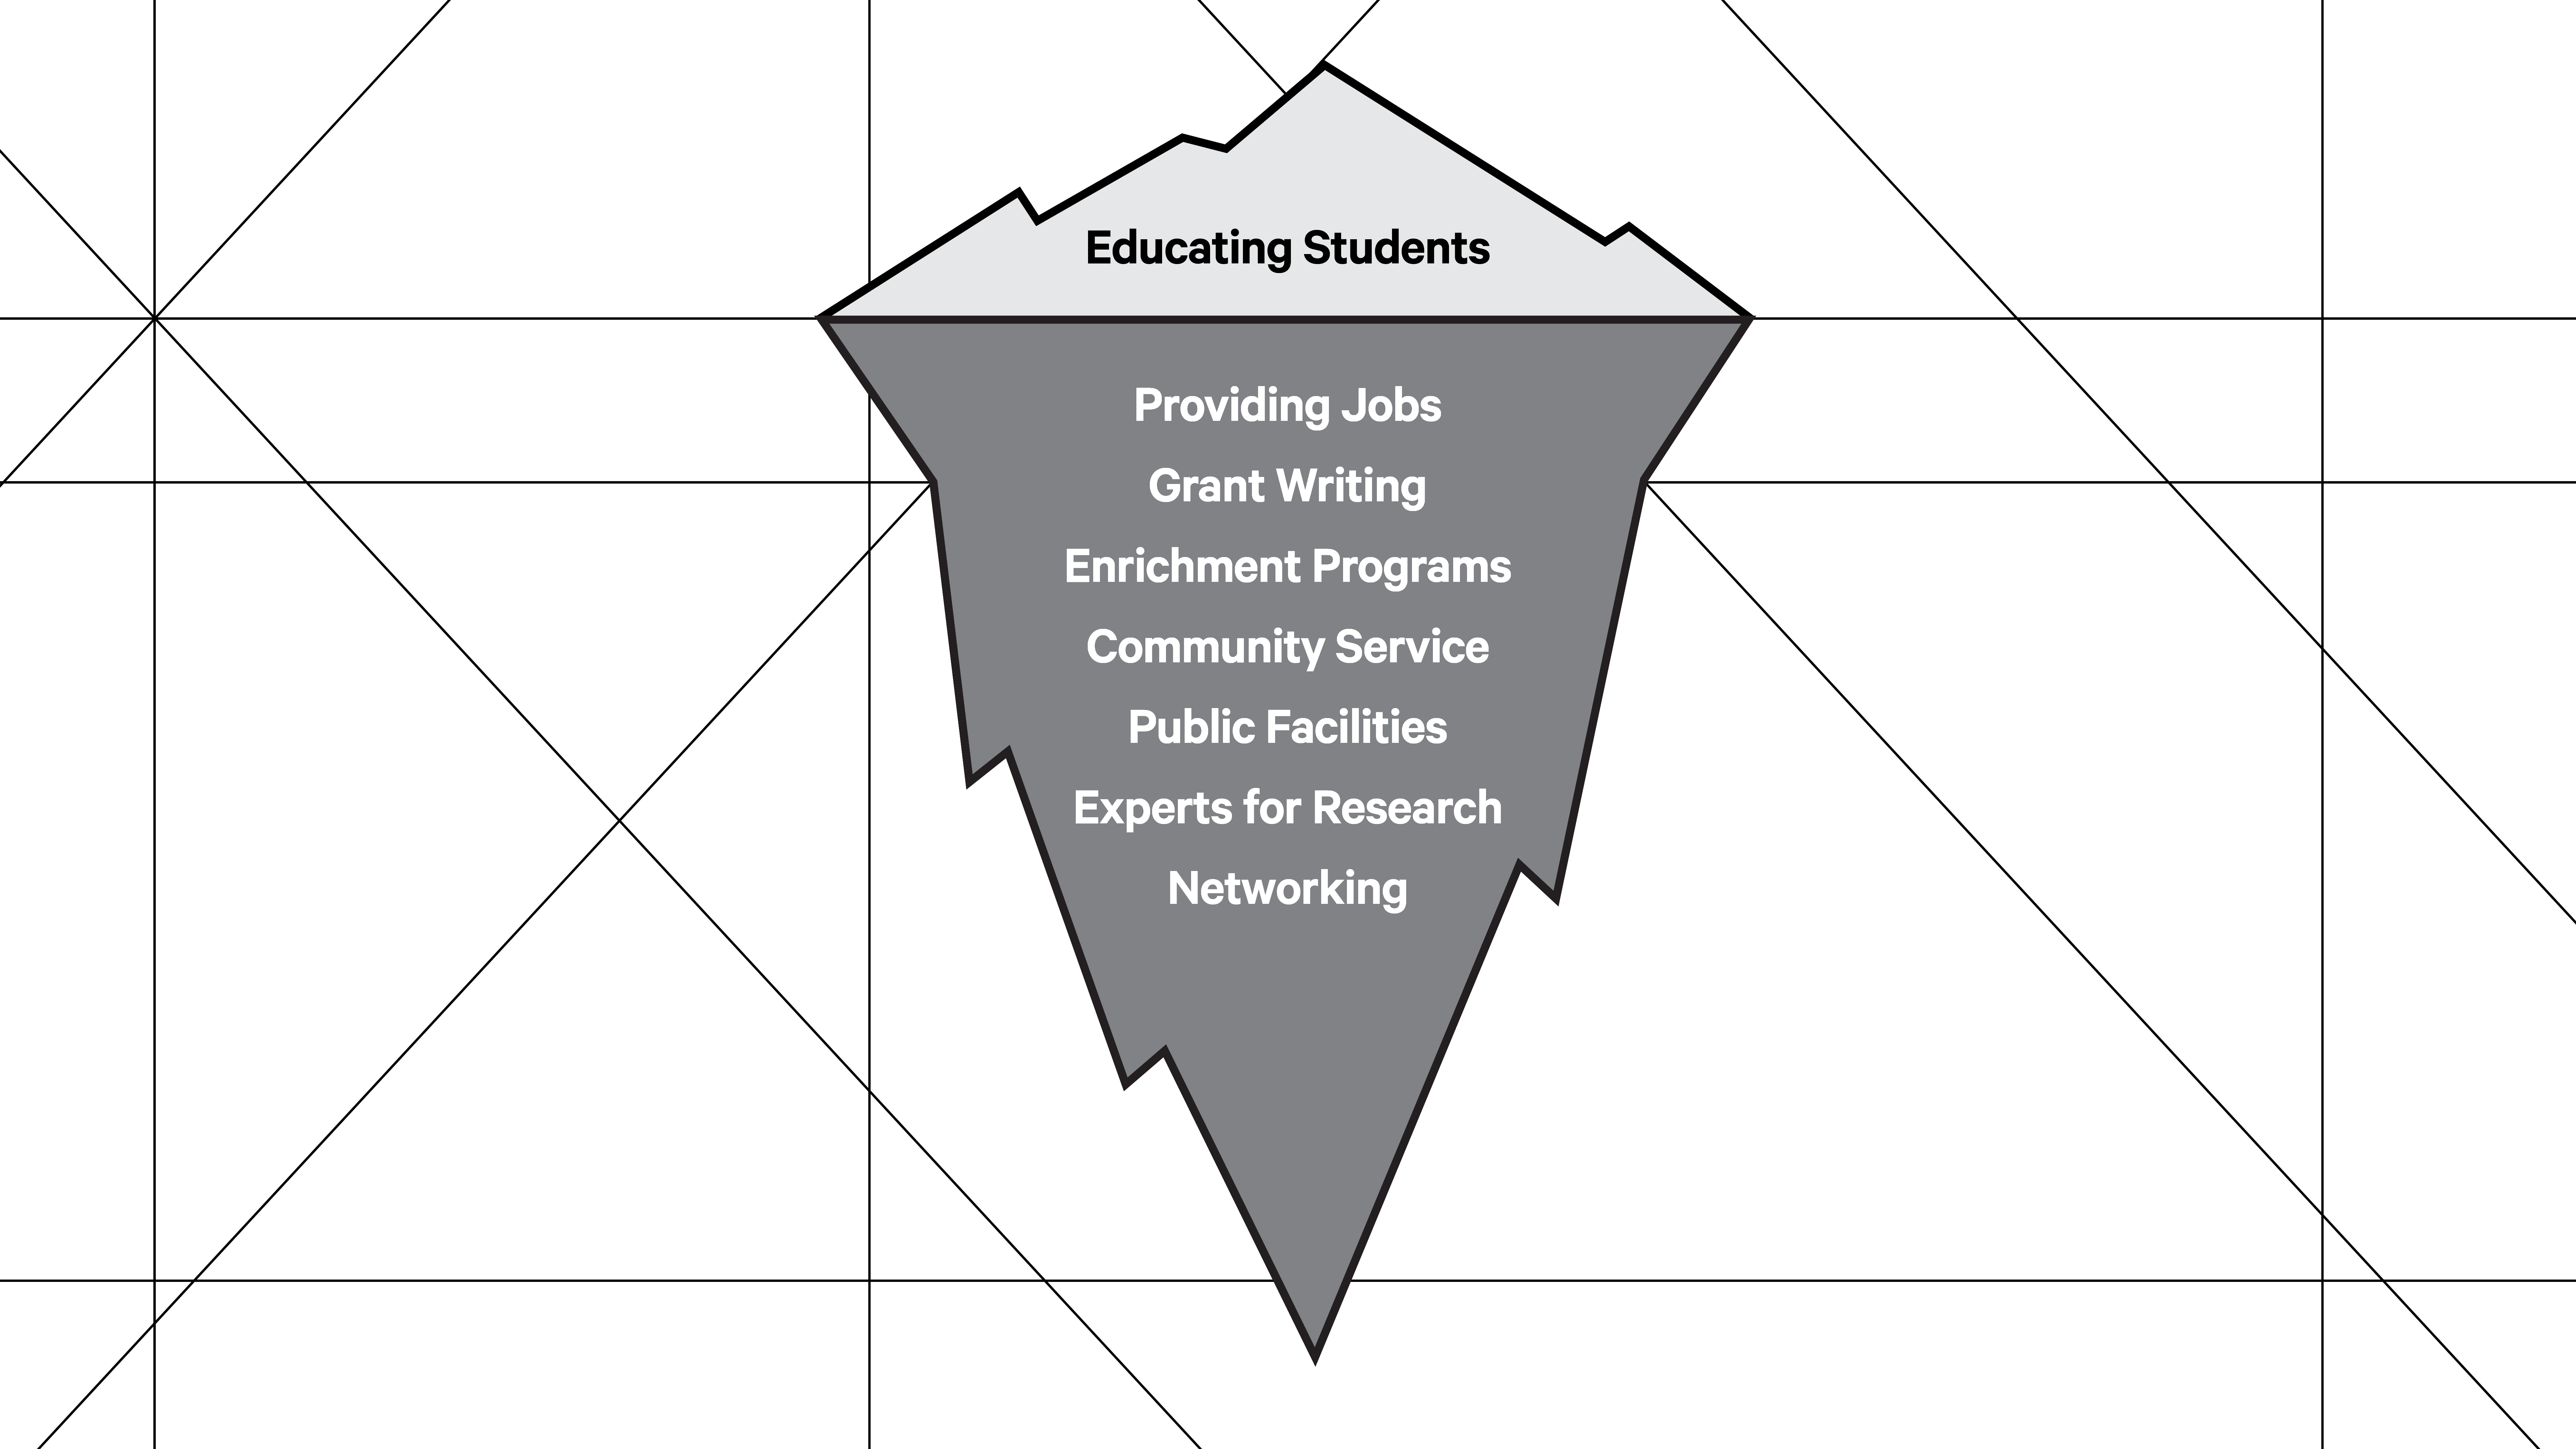 A graphic of an iceberg. At the top above the water are the words Education Students. Below the water line is a list of services: Providing Jobs, Grant Writing, Enrichment Programs, Community Service, Public Facilities, Experts for Research, Networking